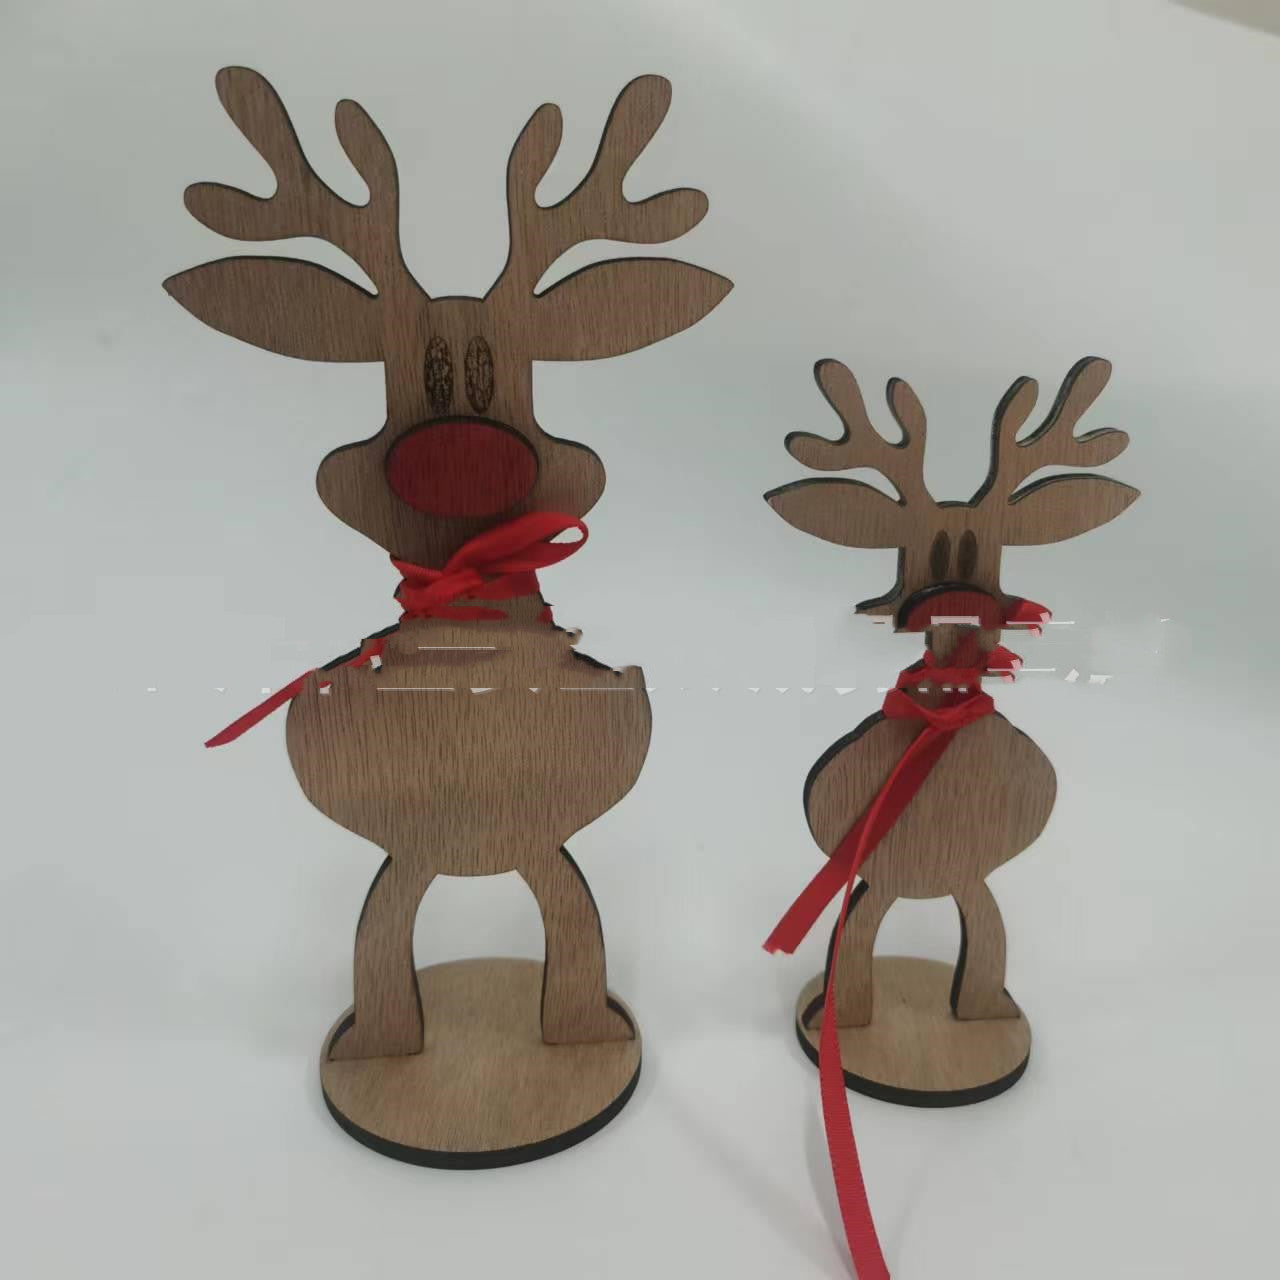 Elk Reindeer Family Christmas Ornament Decoration,Outdoor and Indoor Christmas decorations Items, Christmas ornaments, Christmas tree decorations, salt dough ornaments, Christmas window decorations, cheap Christmas decorations, snowmen, and ornaments.